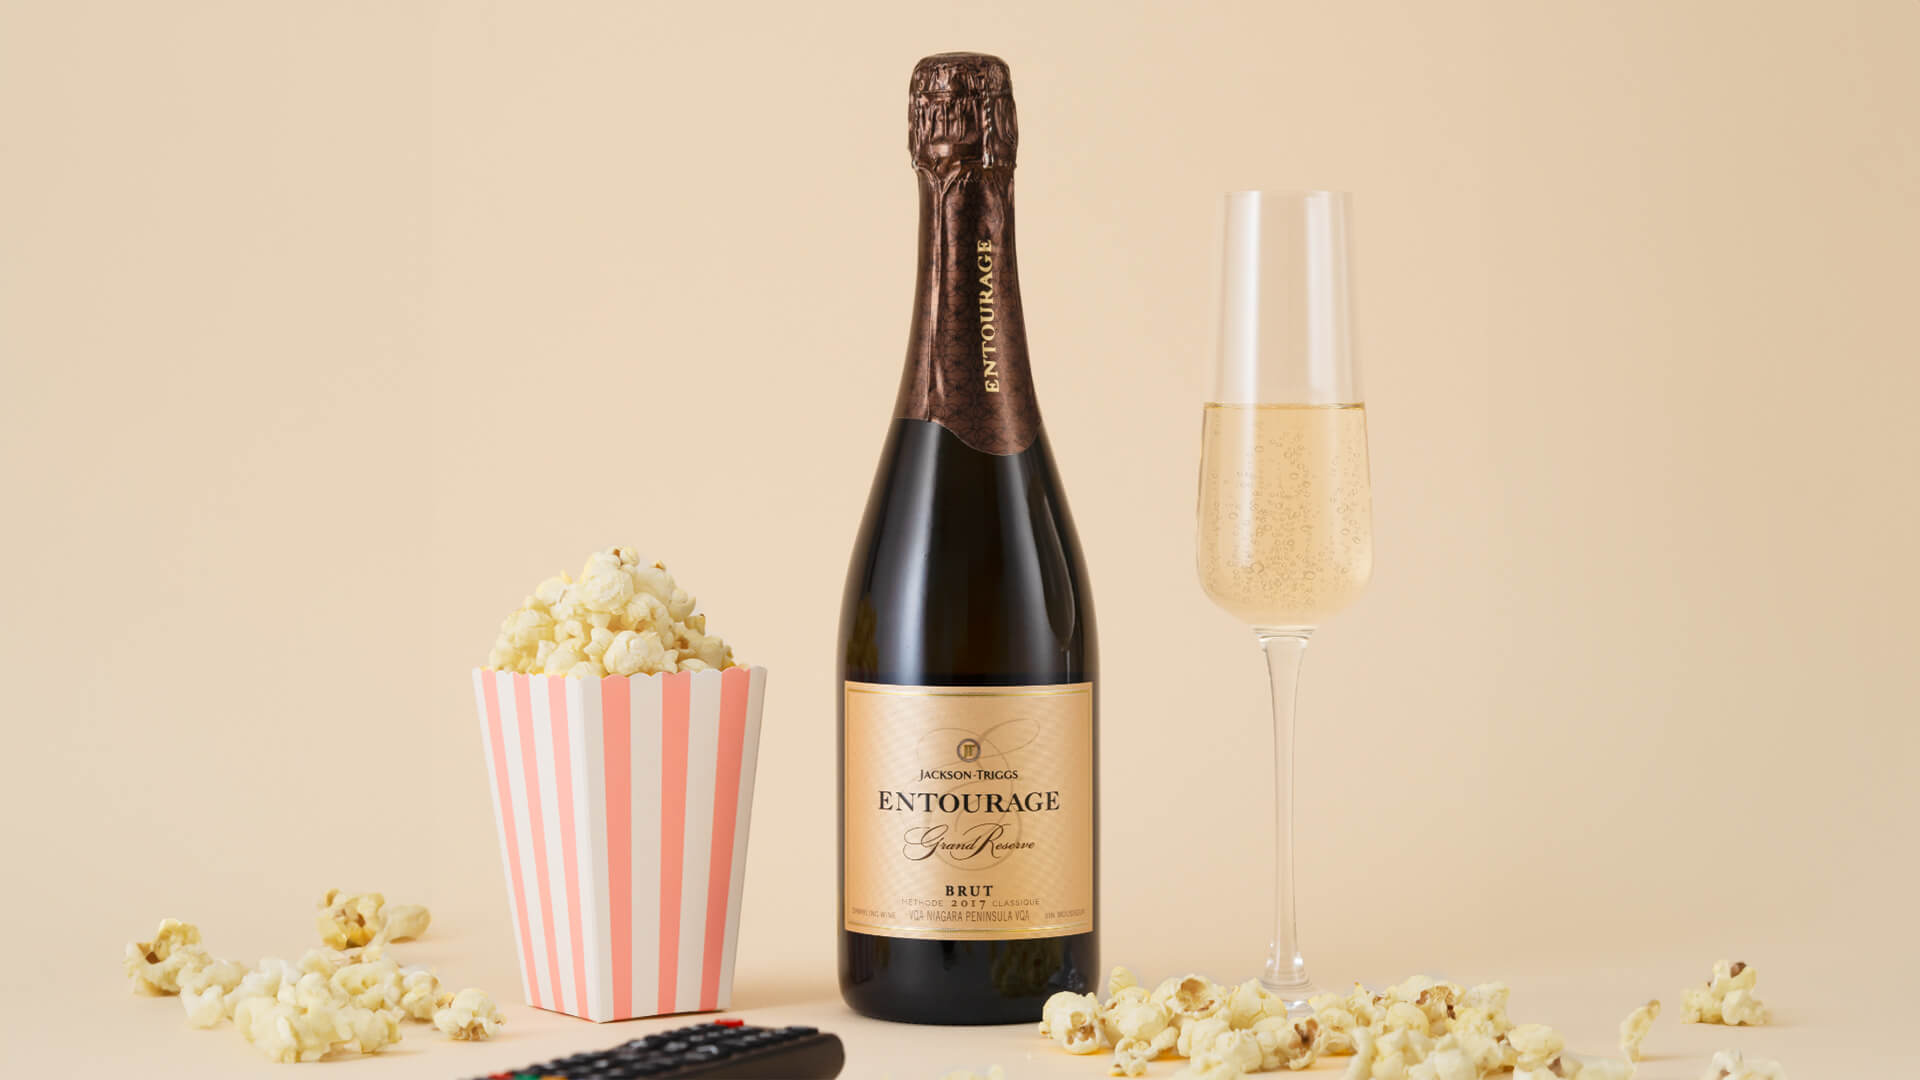 Jackson-Triggs Entourage Grand Reserve Brit with a side of popcorn.